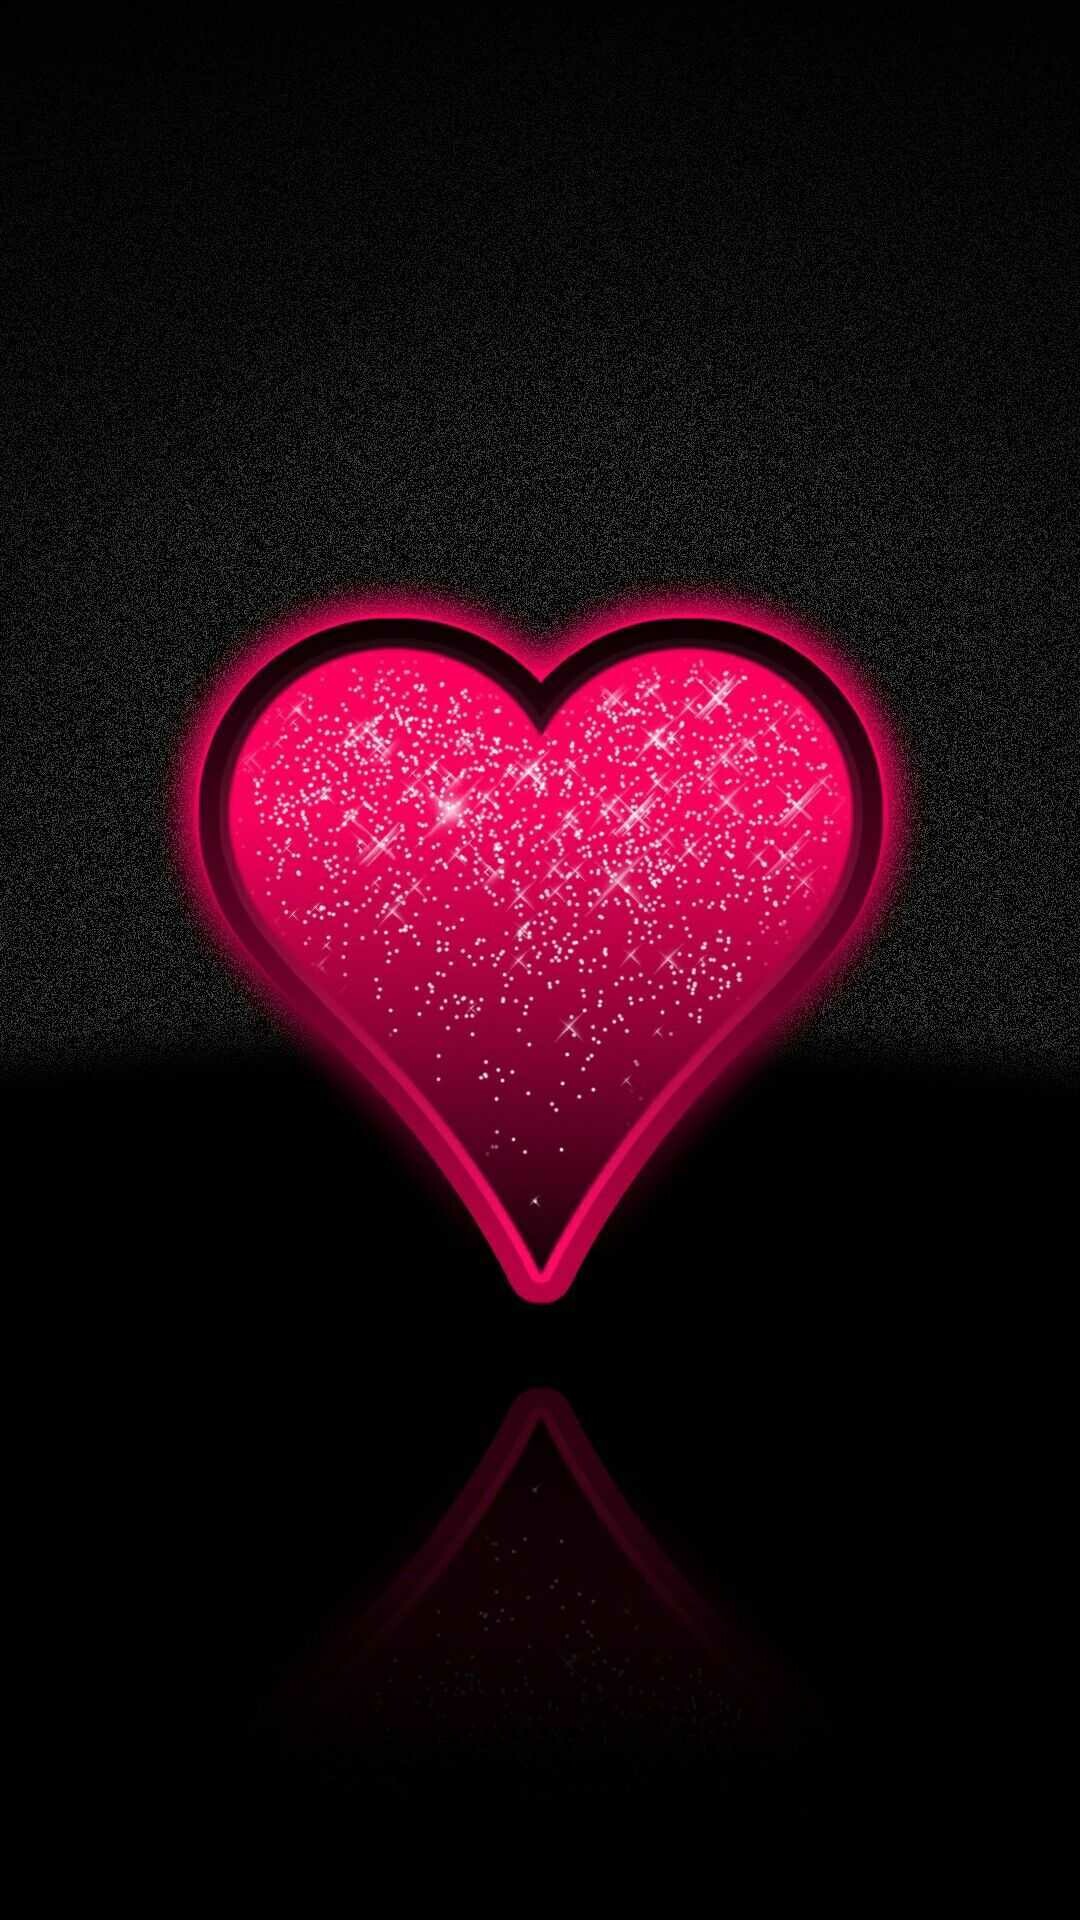 Heart: Symbolizes the unique attraction and connection between two individuals. 1080x1920 Full HD Wallpaper.